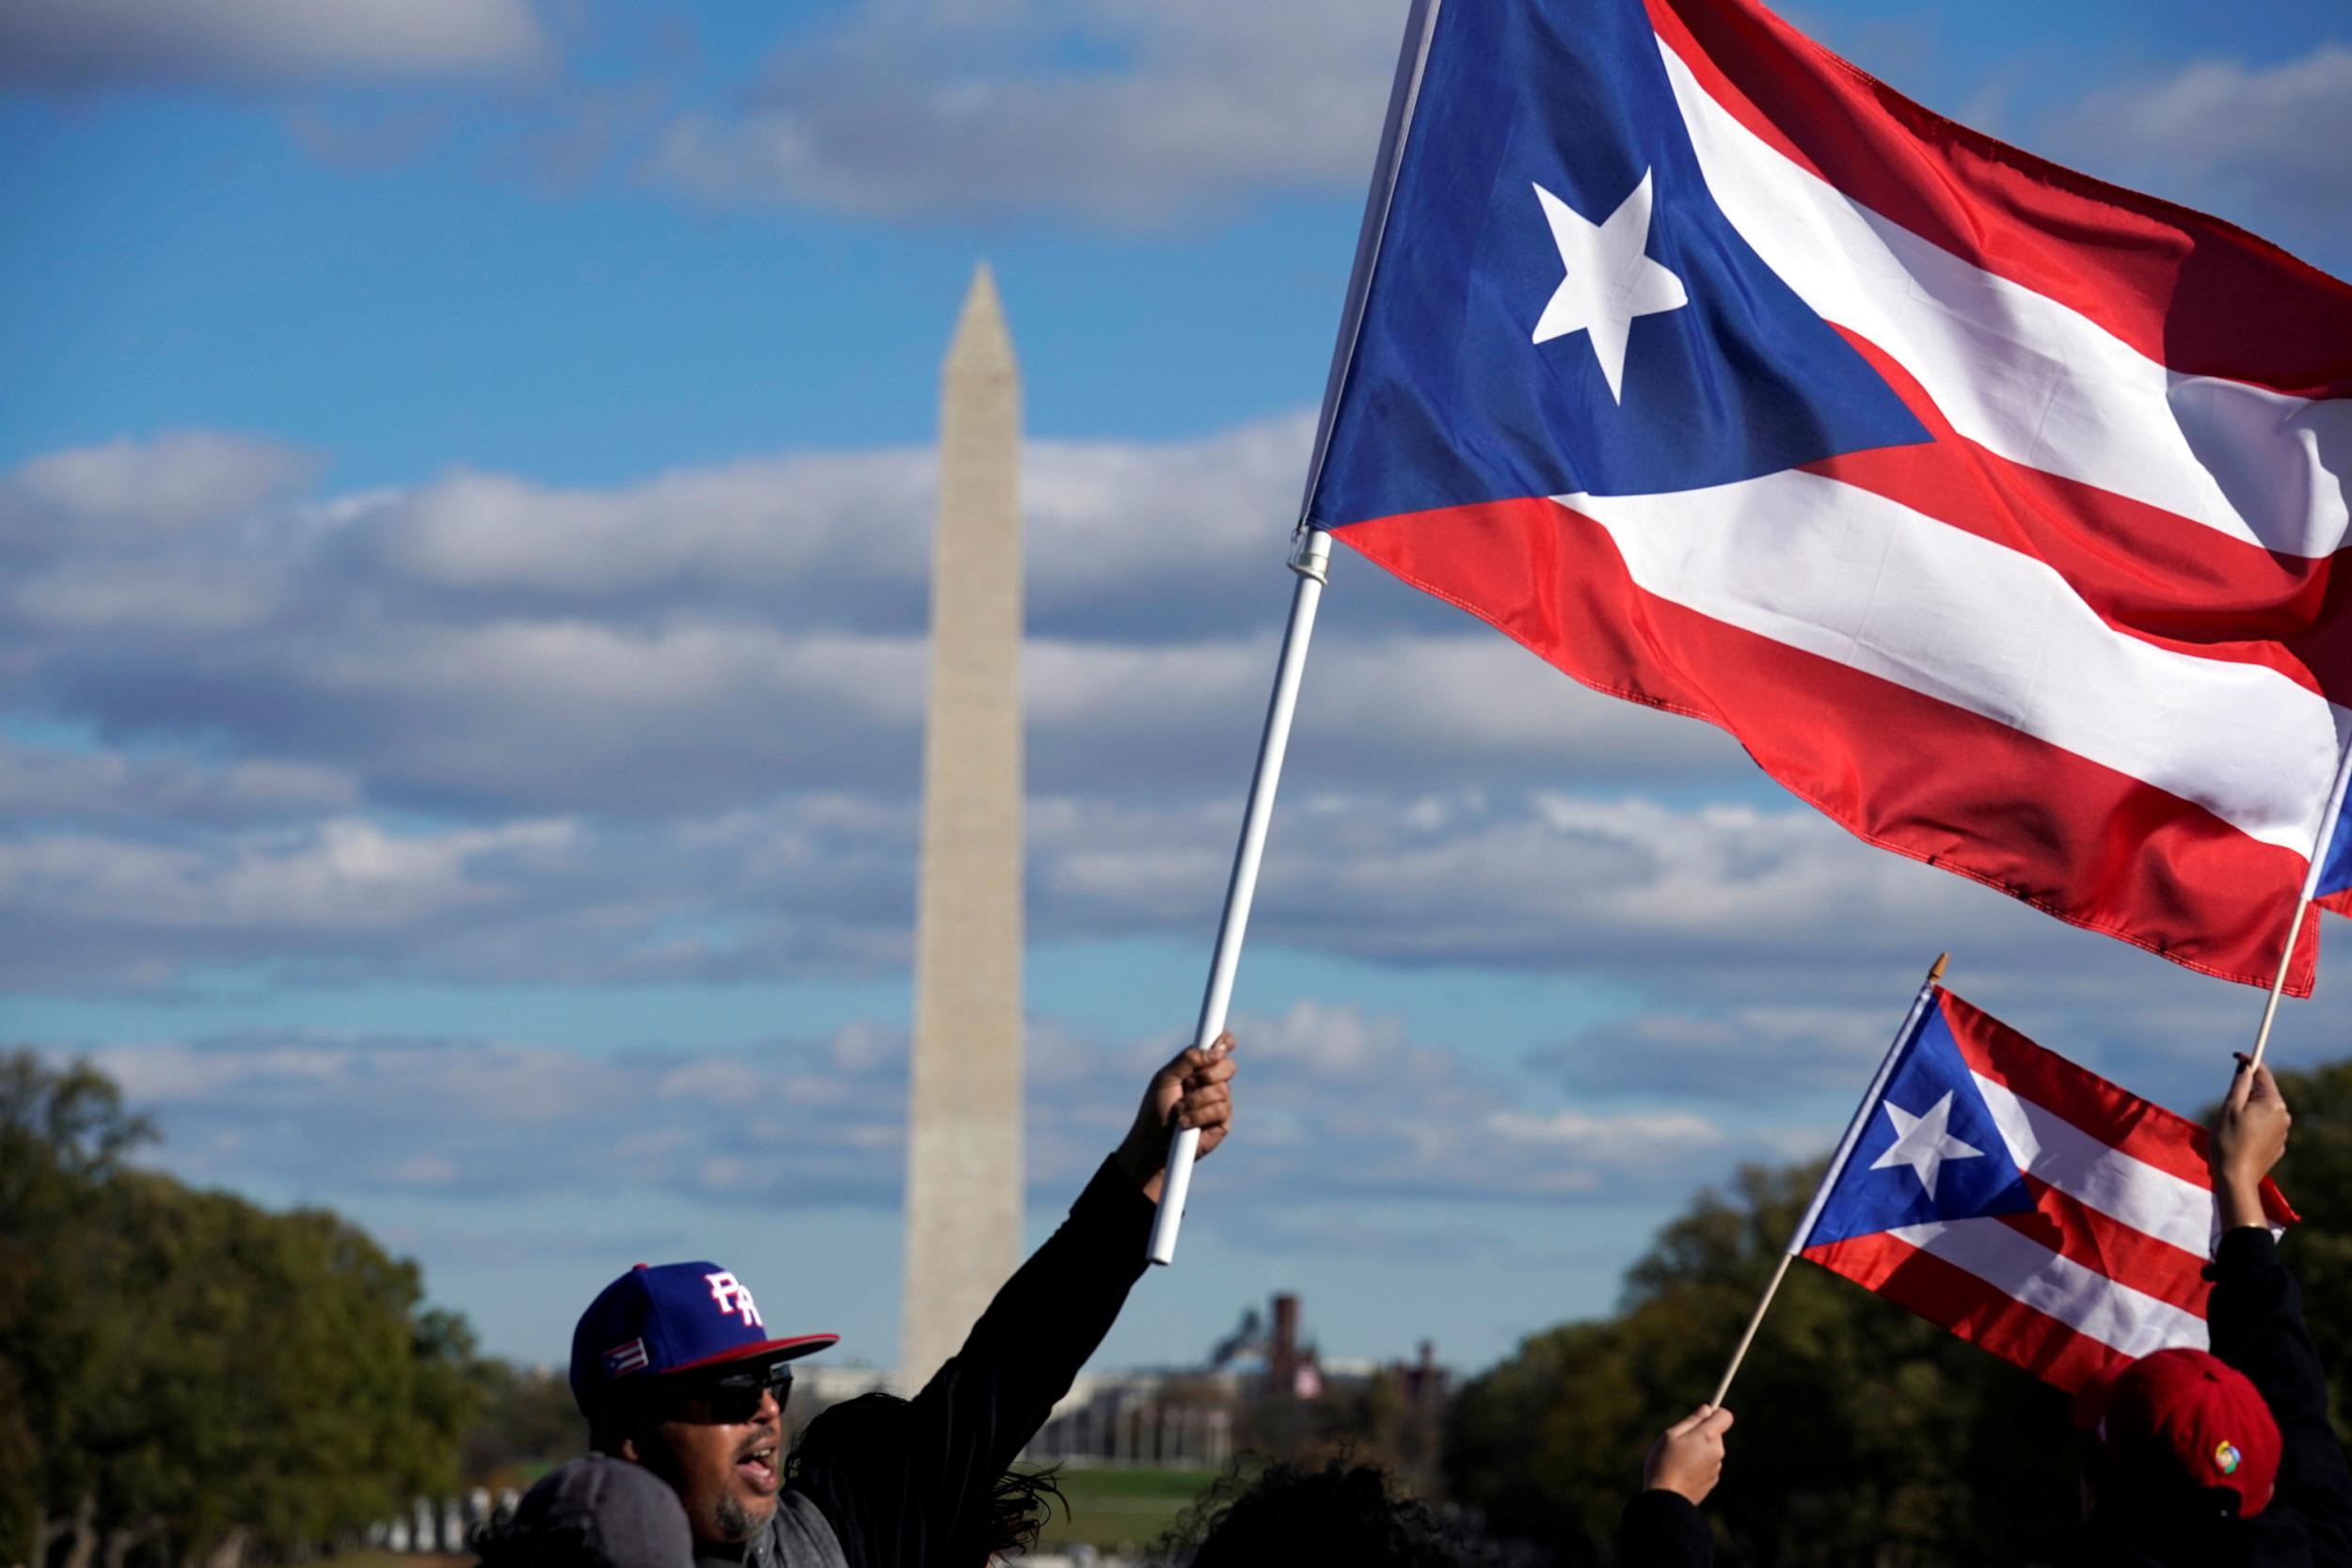 A woman wearing a shirt with the Puerto Rican flag was verbally attacked in a Chicago park, recording the entire incident on her cellphone and posting it online.